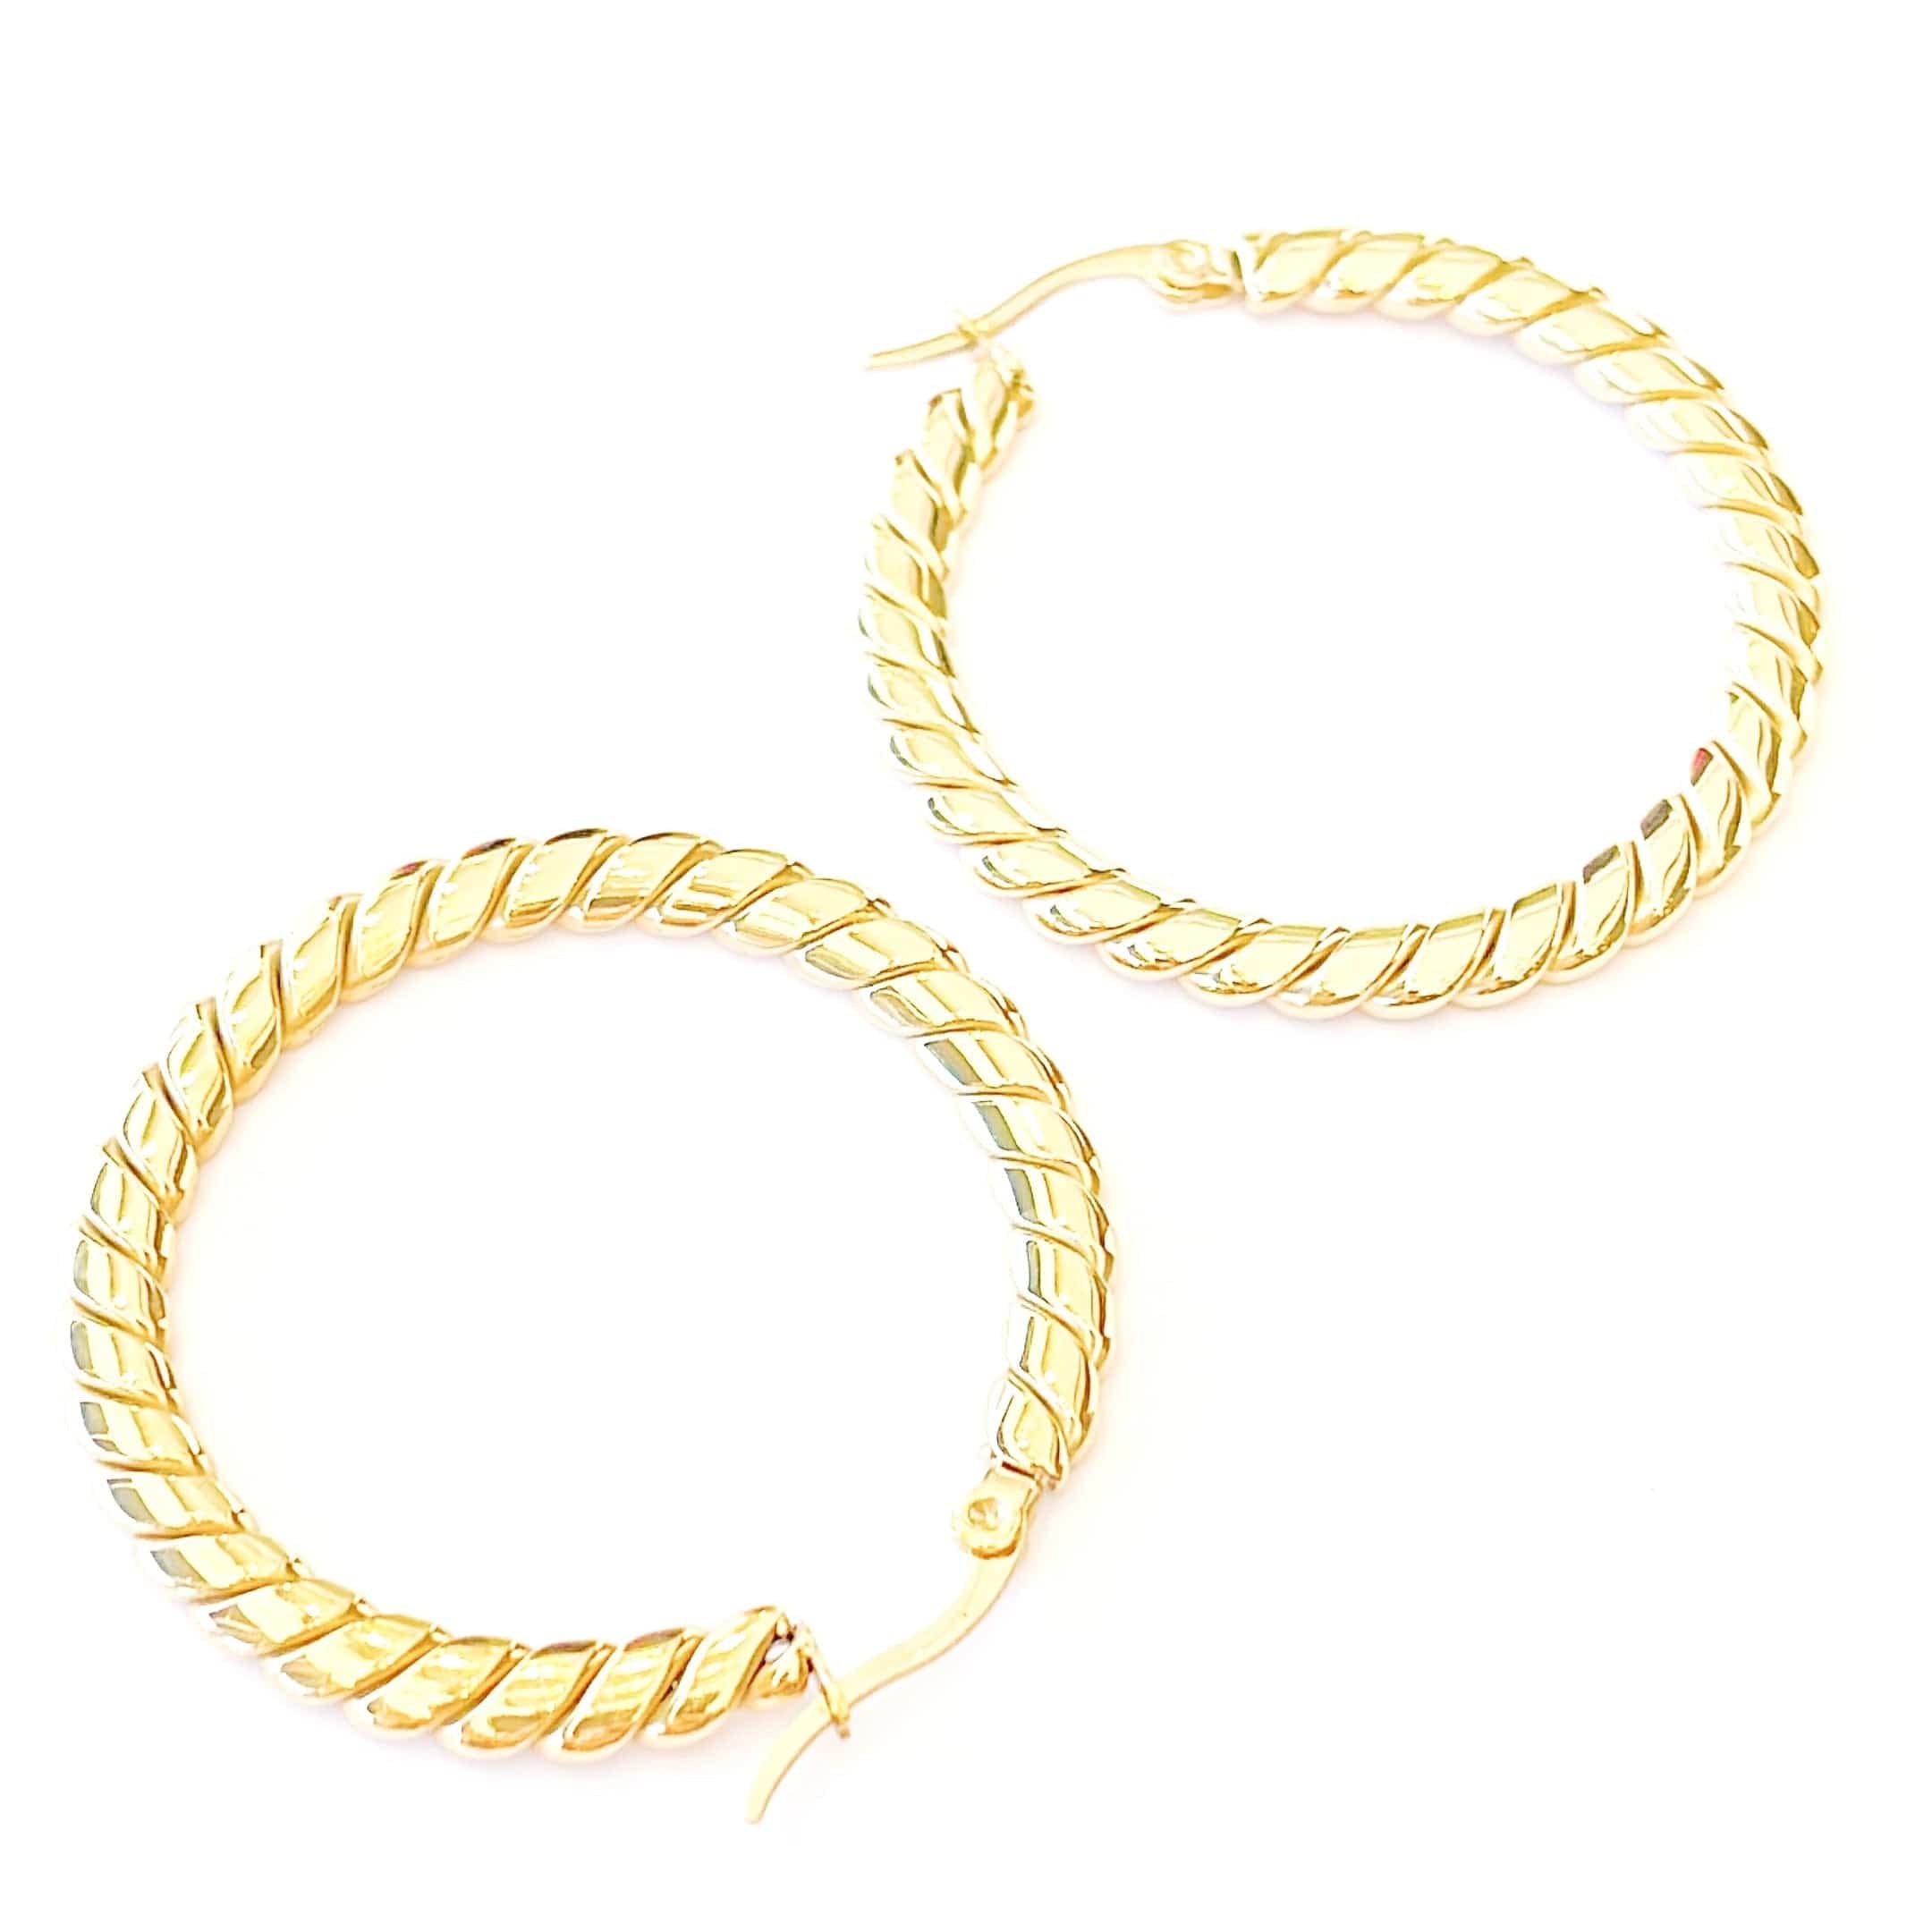 Gold Twisted Hoop Earrings - Gottohaveitfashion